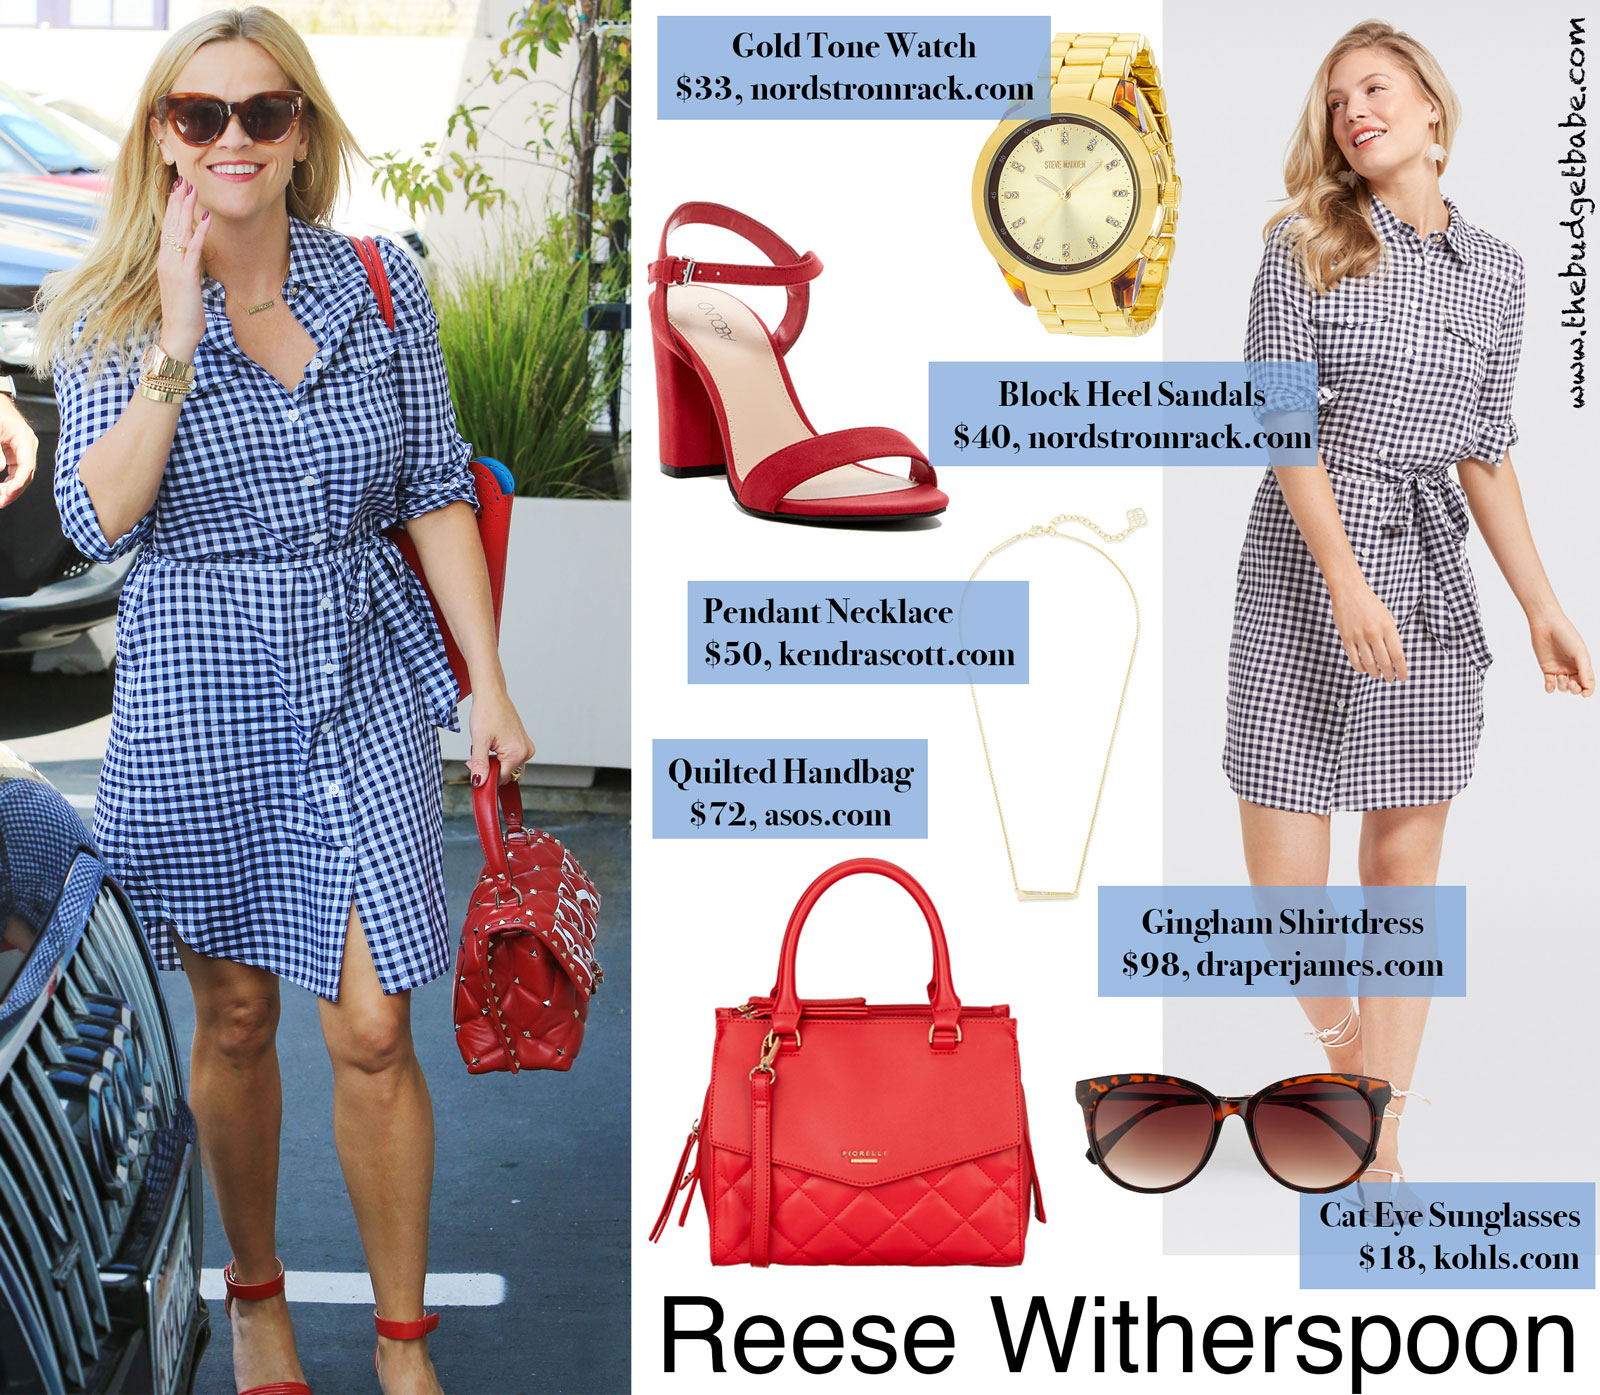 Reese Witherspoon Gingham Dress Look for Less